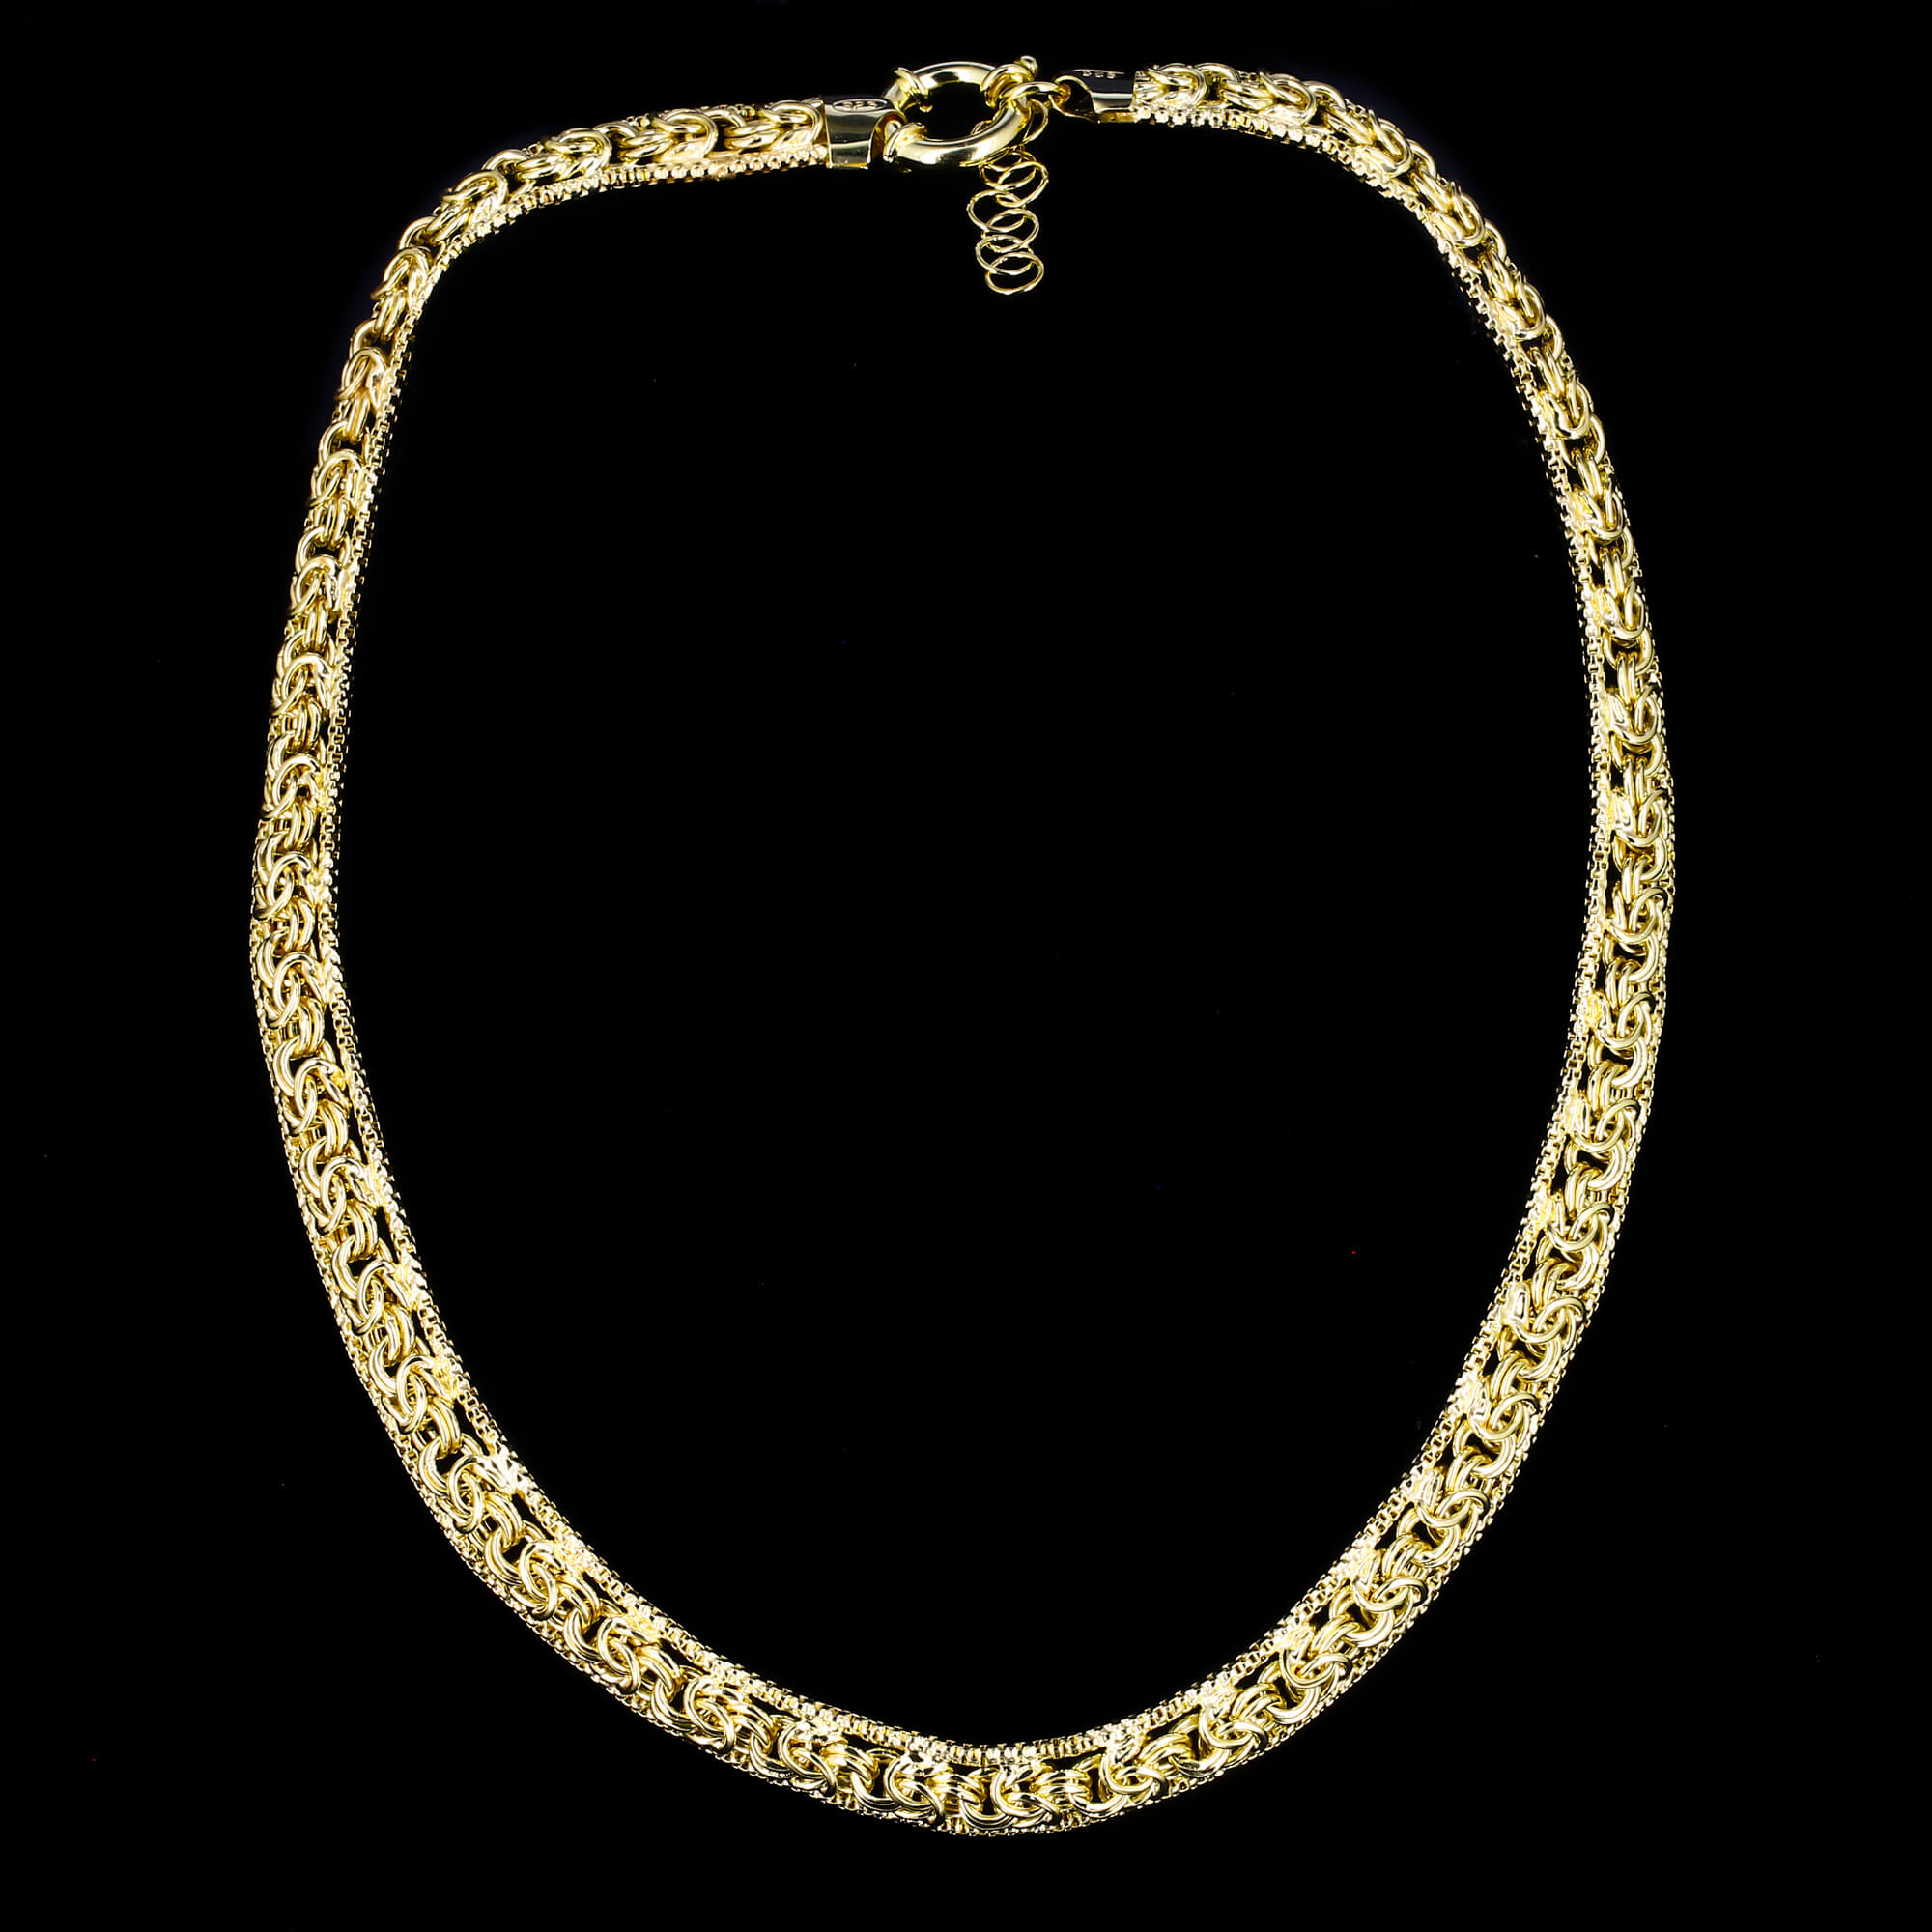 Graceful gilded royal chain